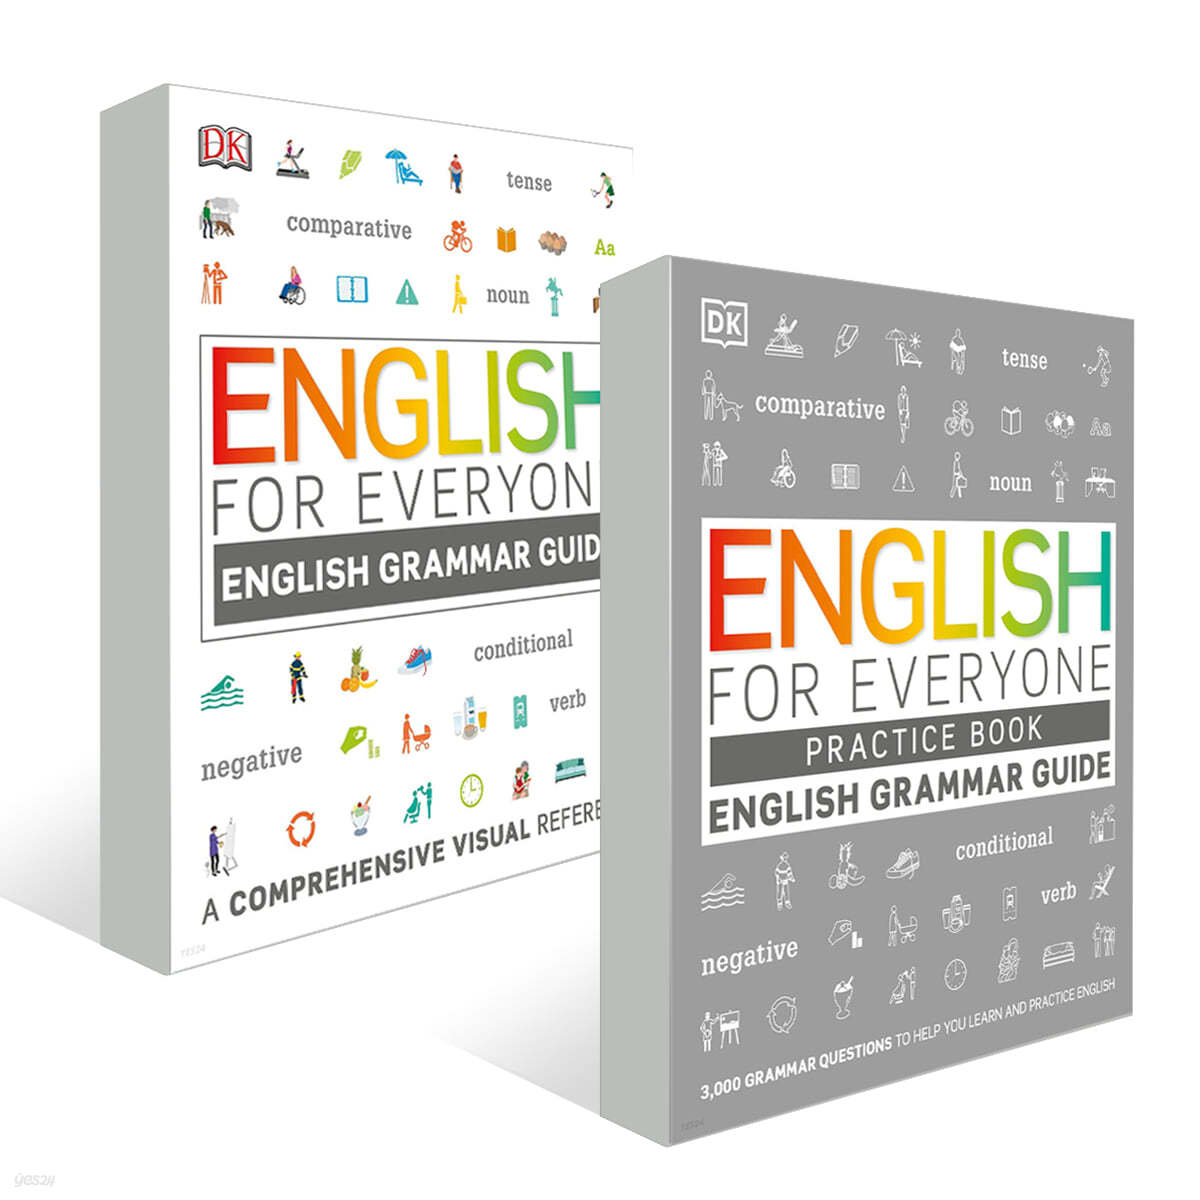 English for Everyone English Grammar Guide + Practice Book